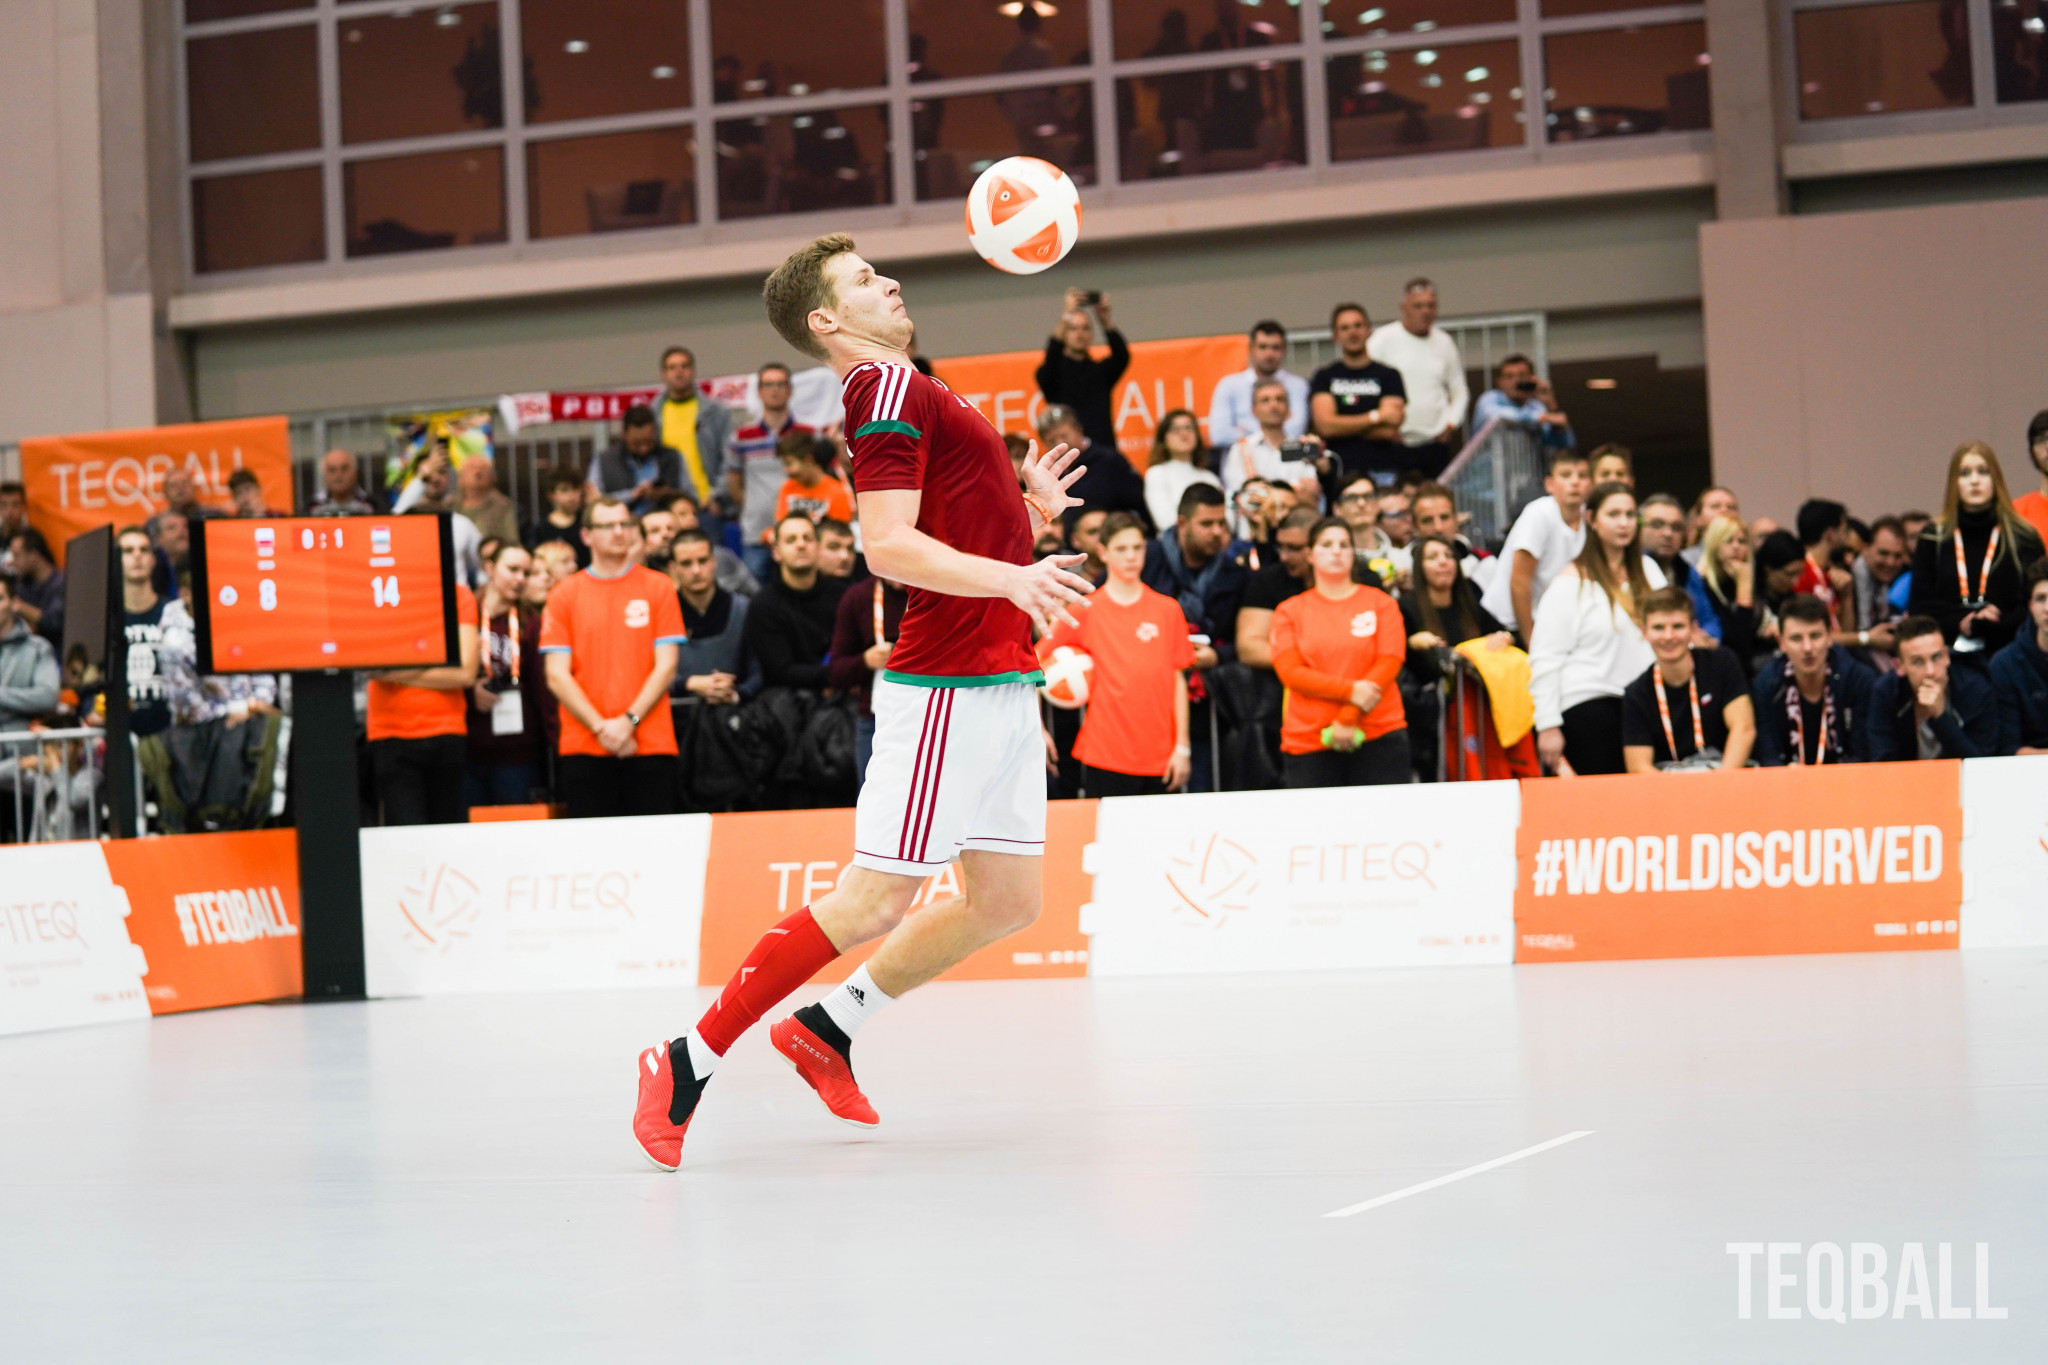 Ádám Blázsovics is ranked the number one teqball player in the world ©FITEQ